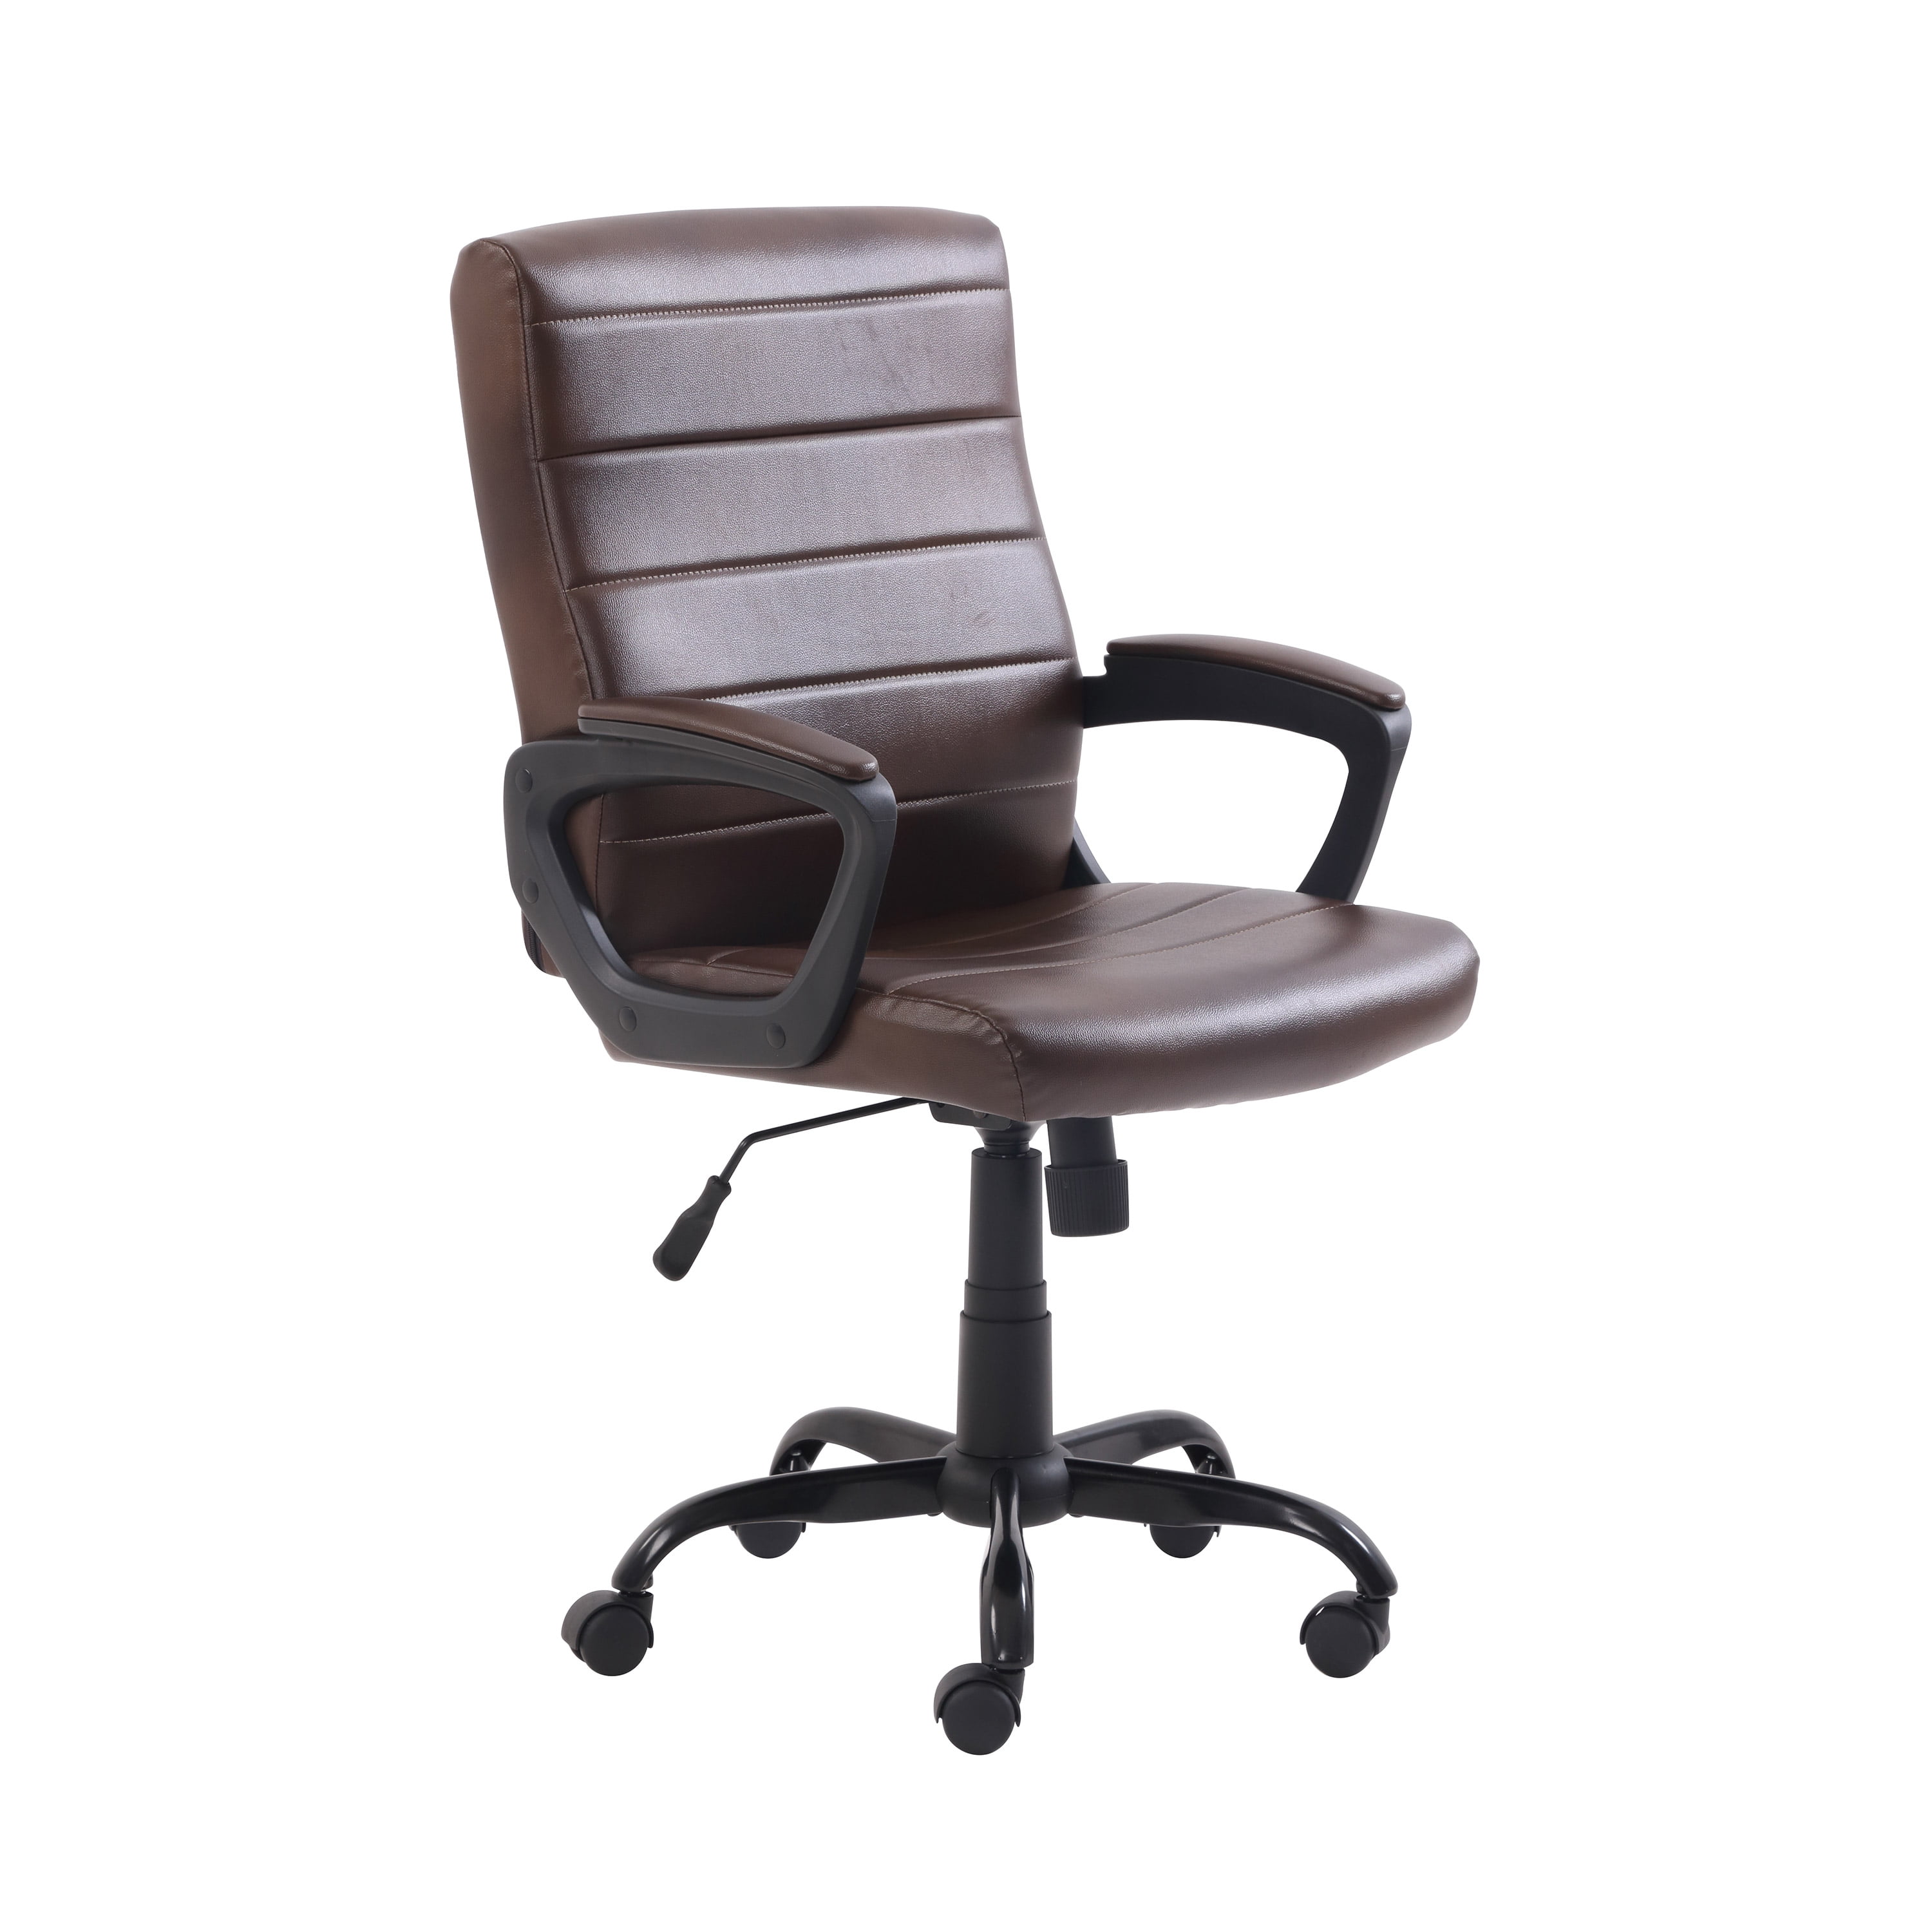 Mainstays Mid-Back Manager's Office Chair with Arms, Brown Bonded